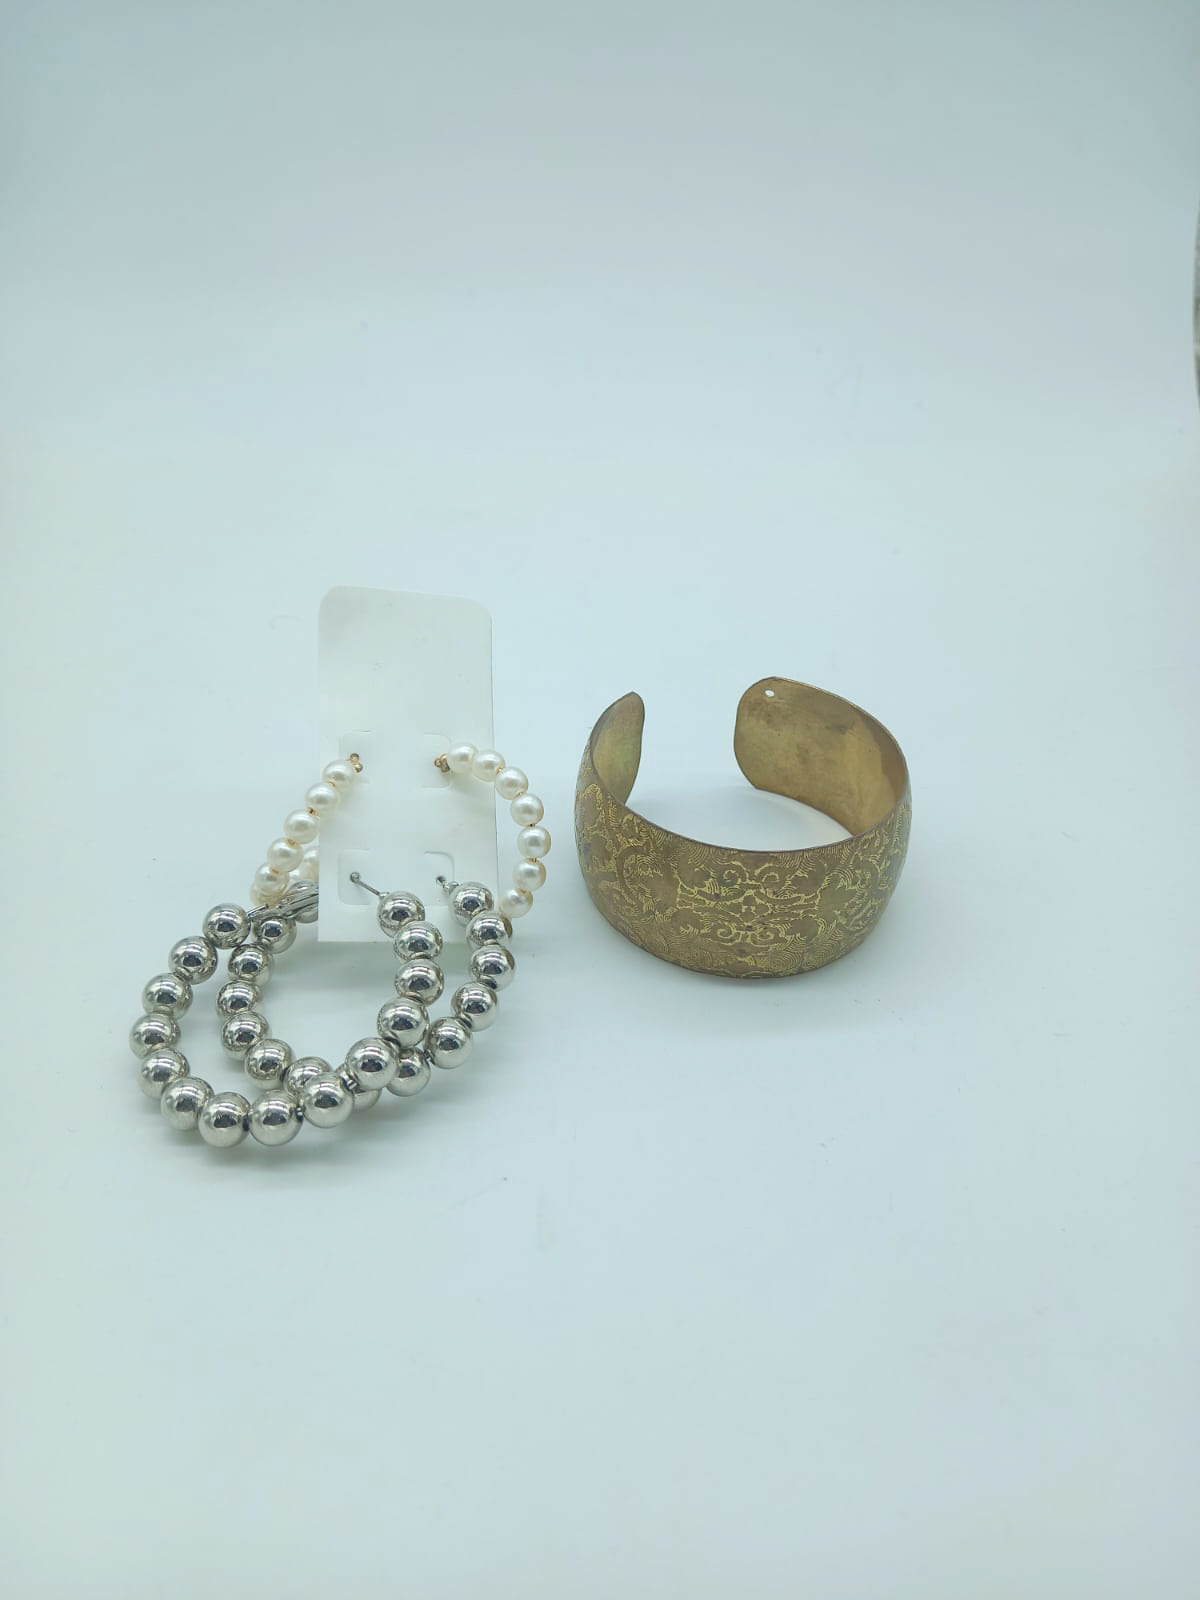 Golden Cuff Bangle and Pearl Hoop Earrings for Women (COMBO DEAL)